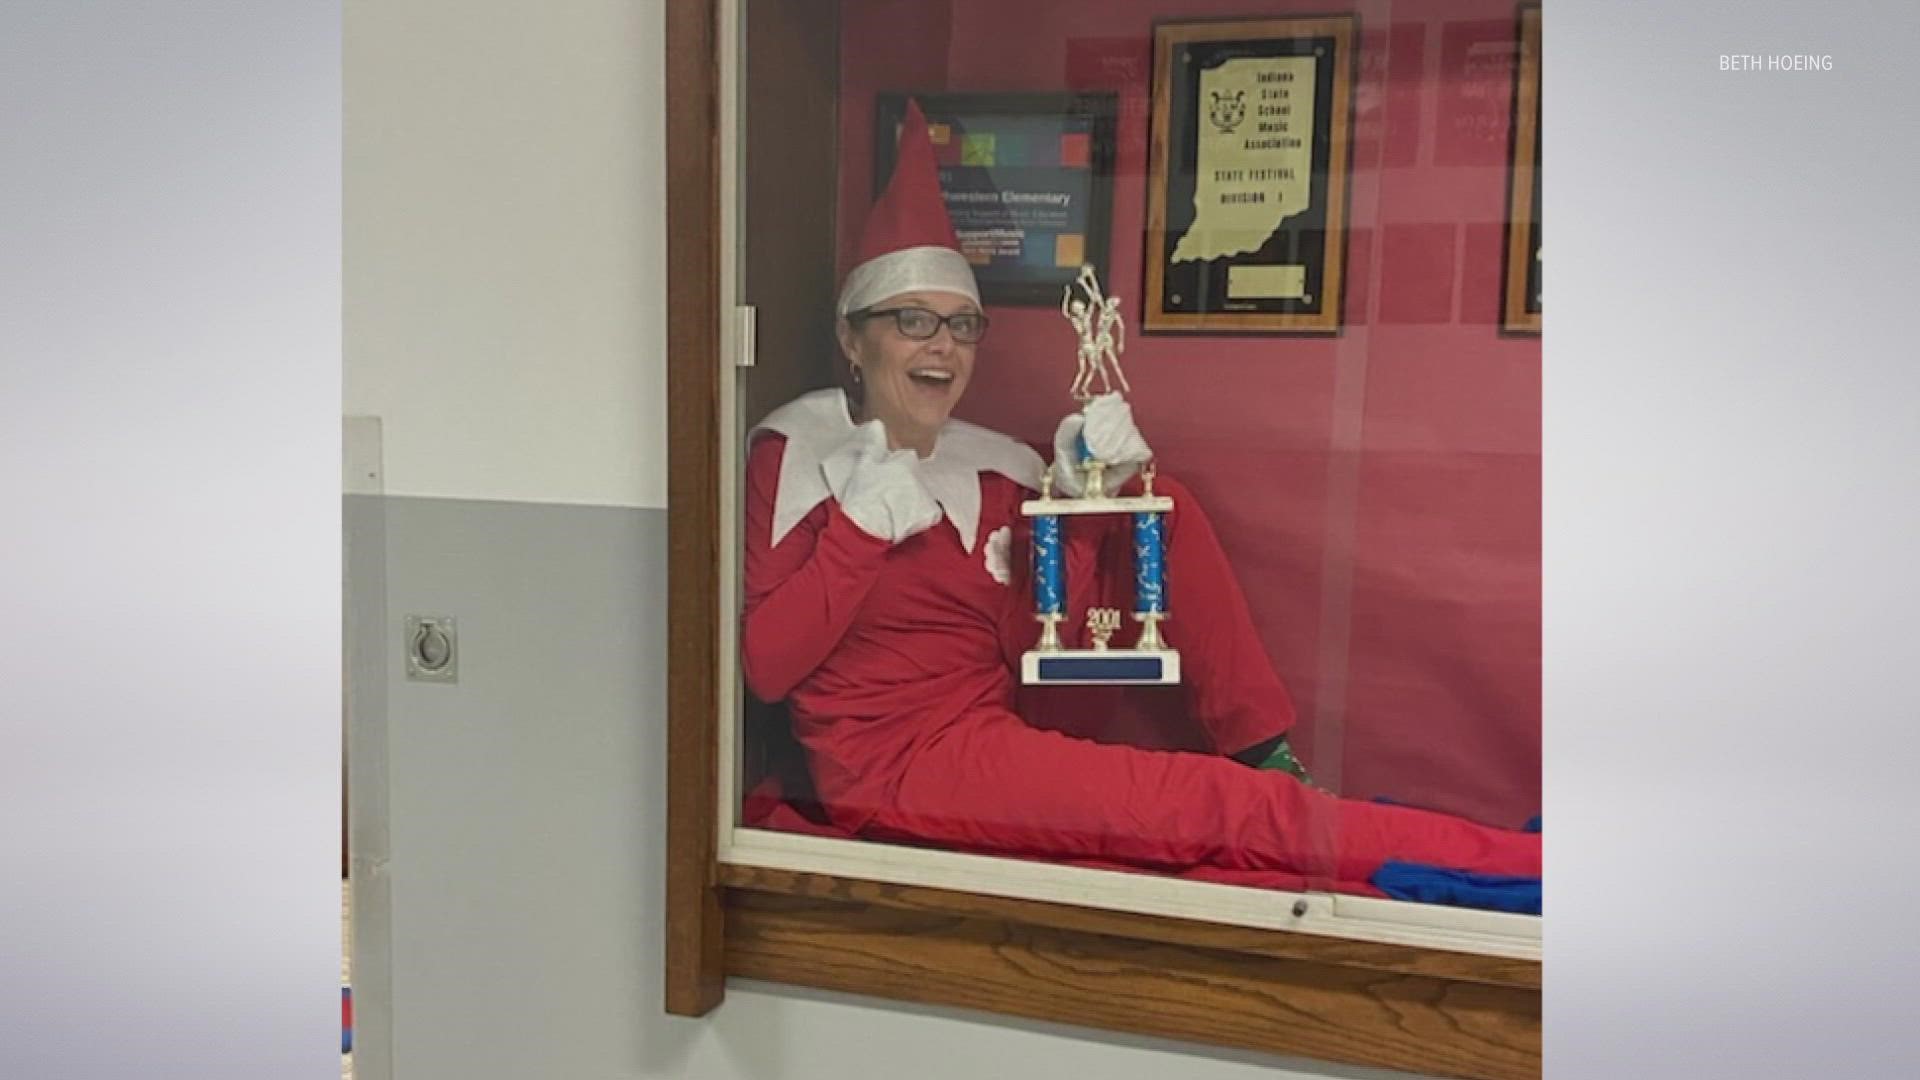 A Indiana principal is going viral after posing as the 'Elf on the Shelf' for her elementary students.